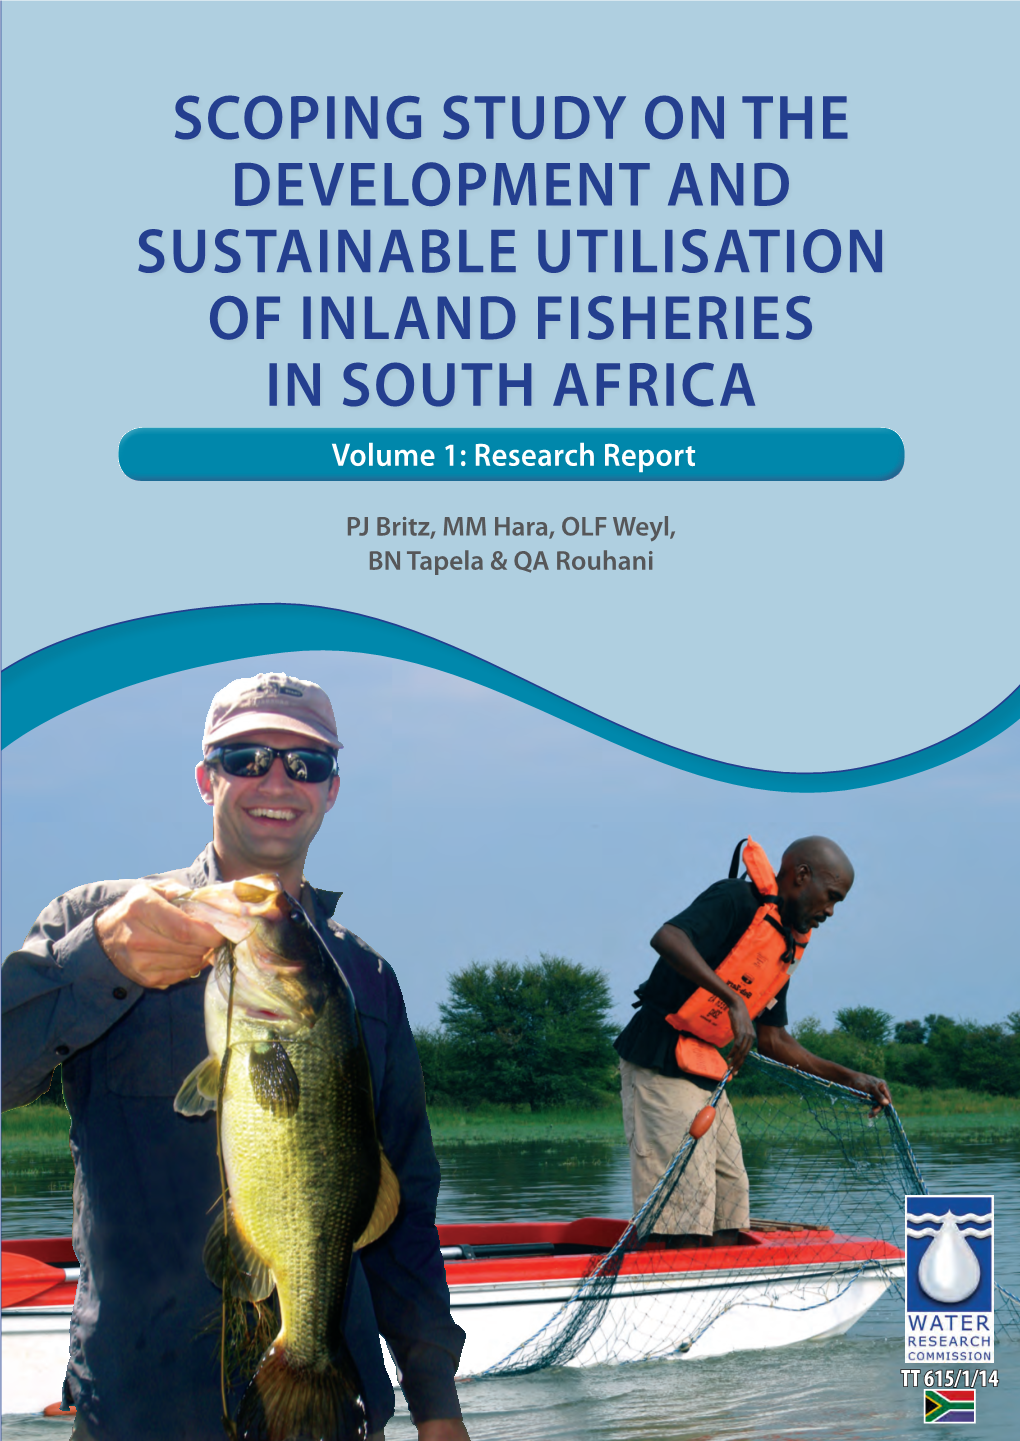 Scoping Study on the Development and Sustainable Utilisation of Inland Fisheries in South Africa Volume 1: Research Report